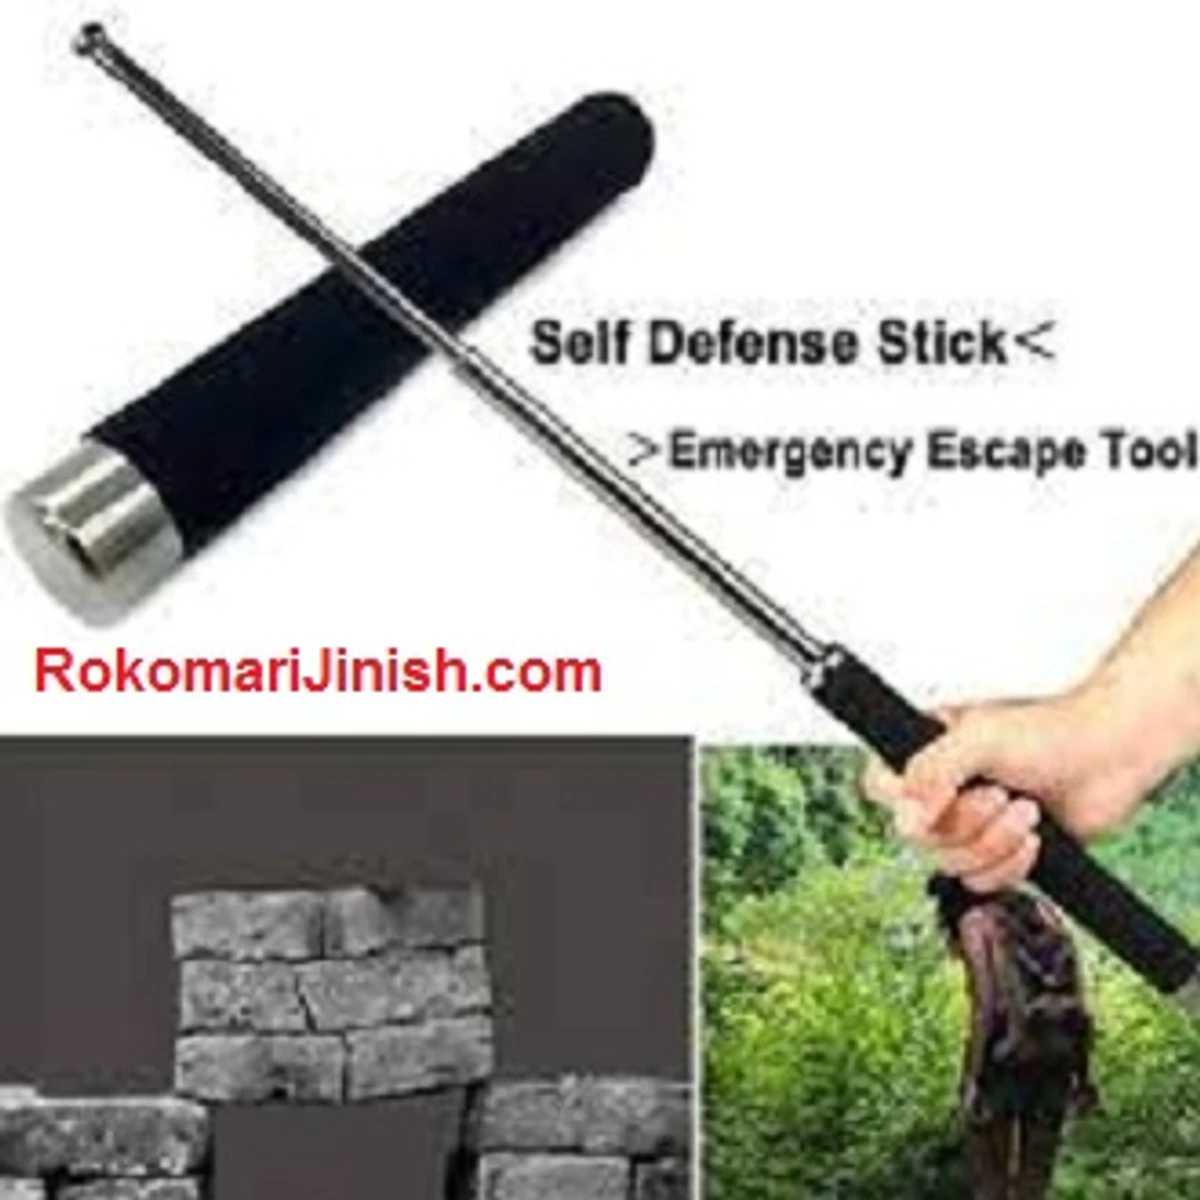 Martial Arm Portable Foldable Metal Stick Self Defense Stick For Safety Road Safety Travel